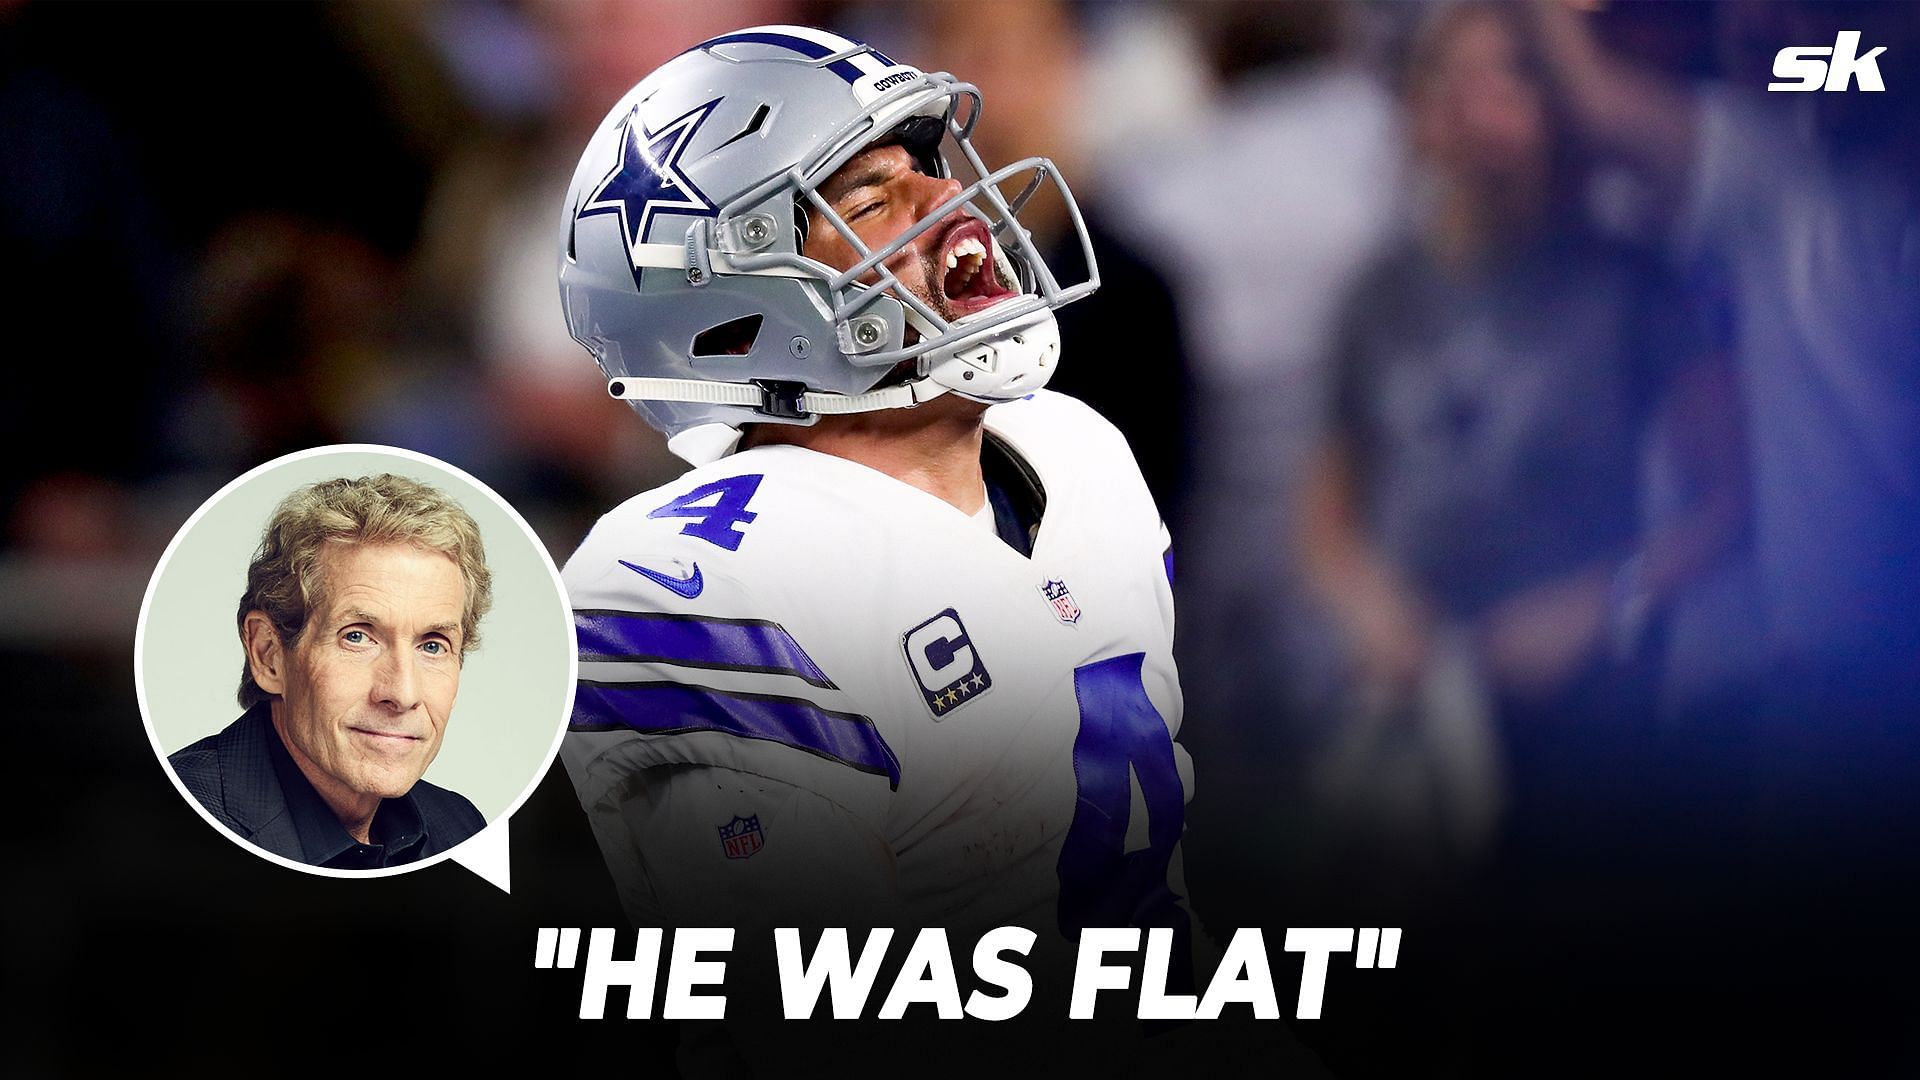 Skip Bayless slams Cowboys&#039; Dak Prescott for his inability to come in clutch